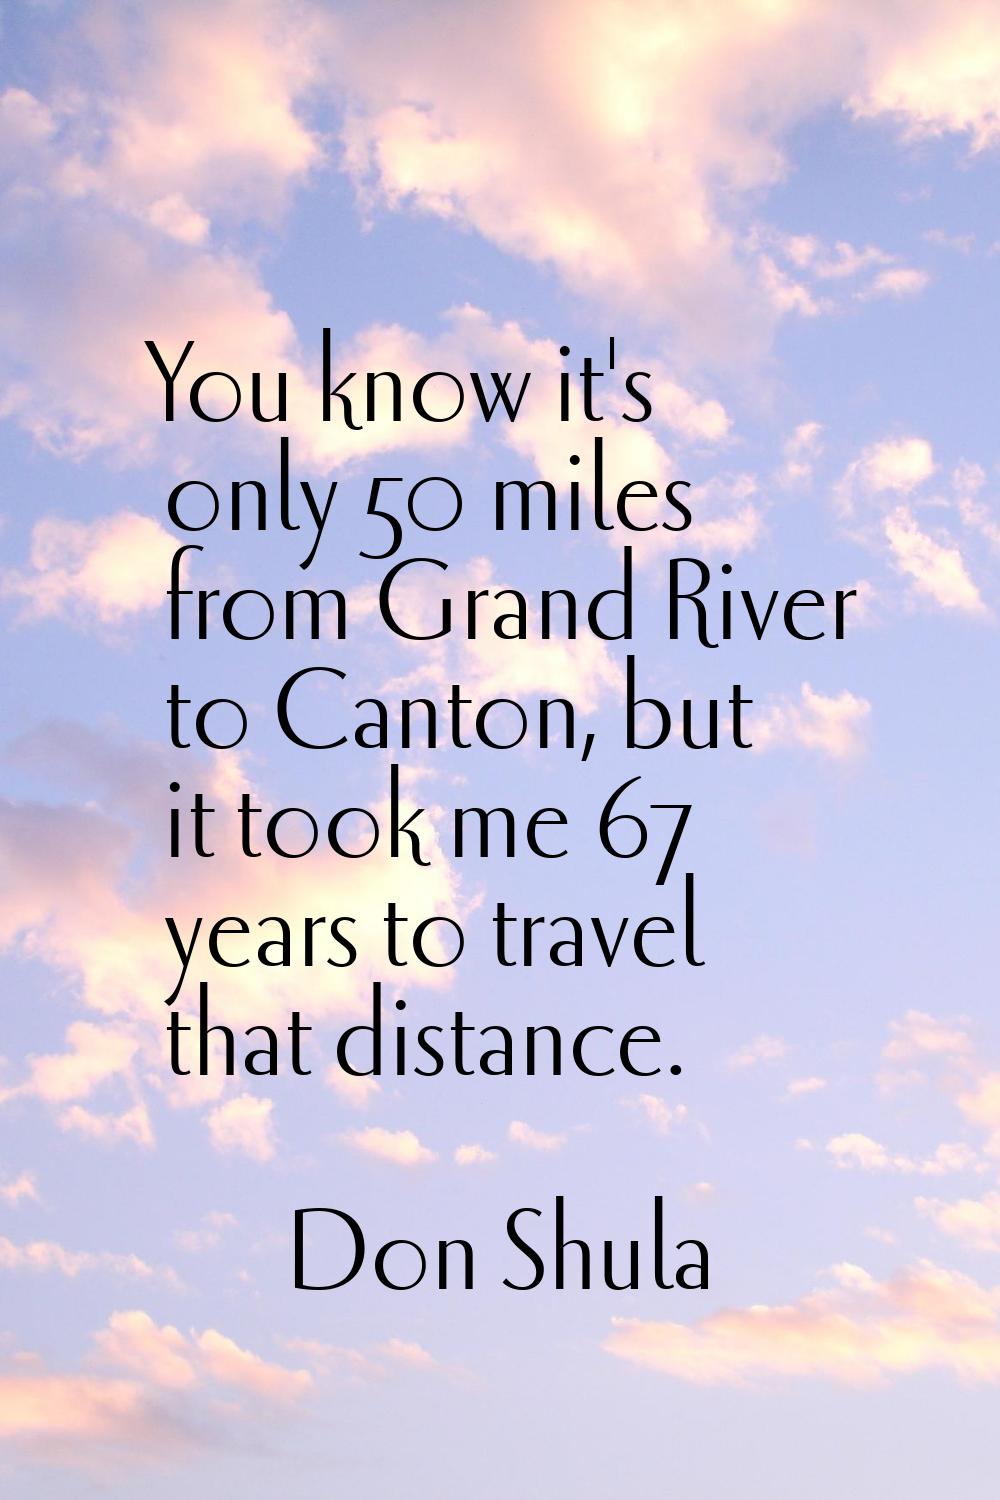 You know it's only 50 miles from Grand River to Canton, but it took me 67 years to travel that dist